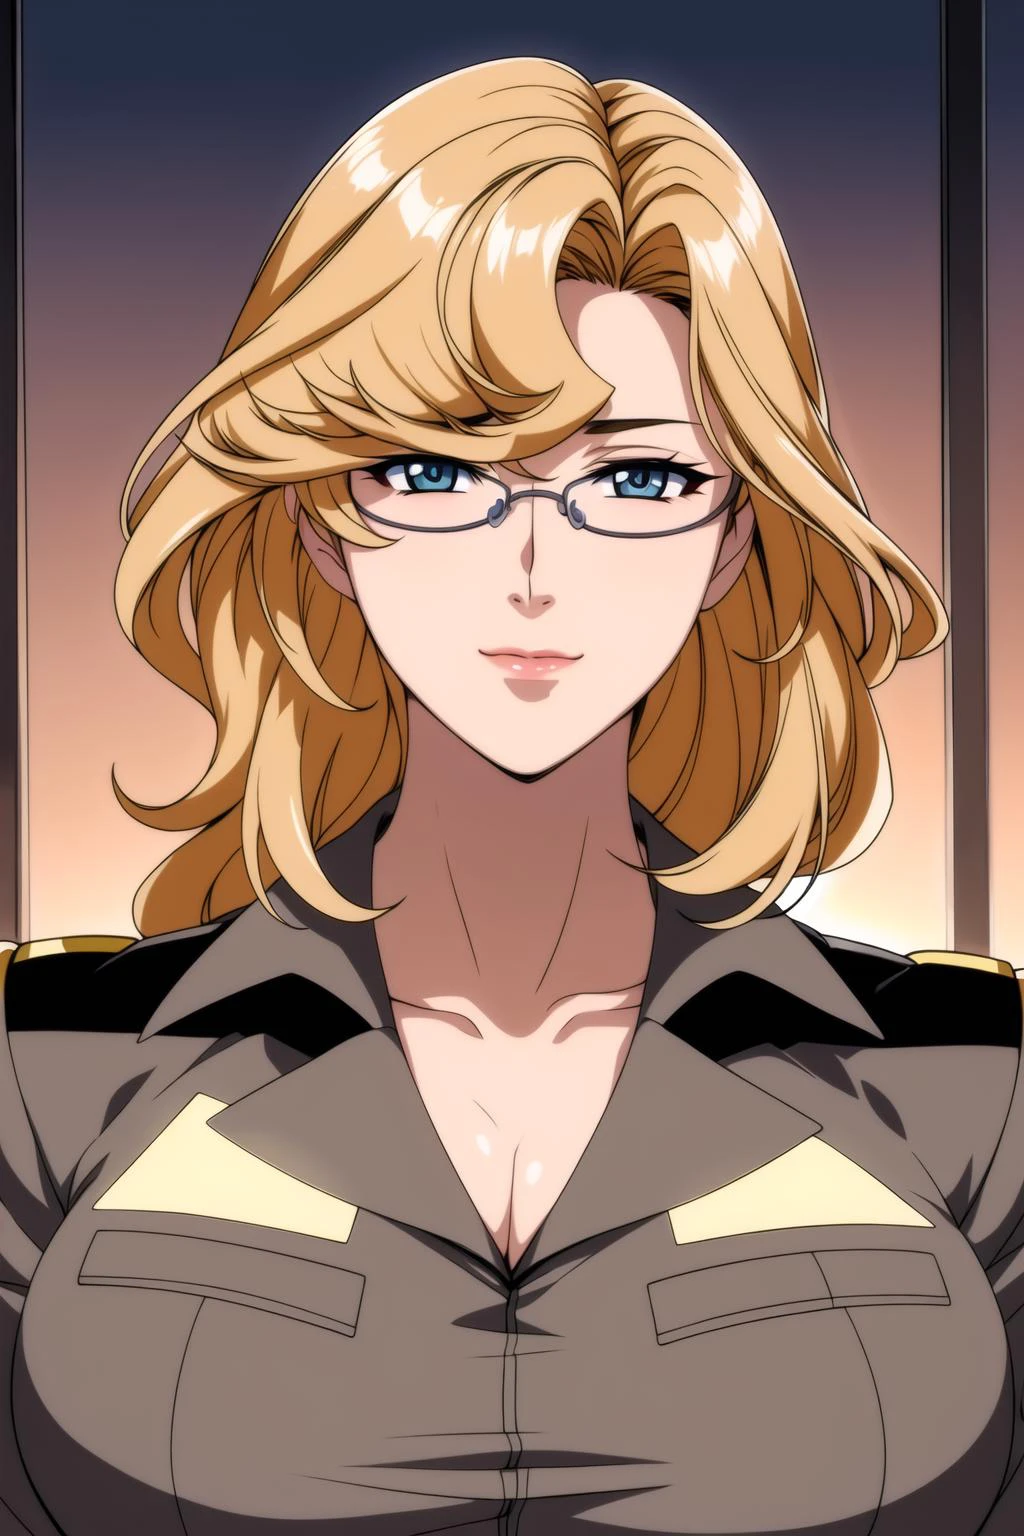 (Night:1.7), Japan, Tokyo, CityView, Before Window,
Standing at attention,
Brown_military_uniform,pantyhose, a uniform with gold trims and a collar,shirt,belt,cleavage, collarbone,
glasses,
blonde hair,blue eyes,lipstick, Bangs,long hair,
1 girl, 20yo,Young female,Beautiful Finger,Beautiful long legs,Beautiful body,Beautiful Nose,Beautiful character design, perfect eyes, perfect face,expressive eyes,perfect balance,
looking at viewer,(Focus on her face),closed mouth, (innocent_big_eyes:1.0),Light_Smile,
official art,extremely detailed CG unity 8k wallpaper, perfect lighting,Colorful, Bright_Front_face_Lighting,shiny skin,
(masterpiece:1.0),(best_quality:1.0), ultra high res,4K,ultra-detailed,
photography, 8K, HDR, highres, absurdres:1.2, Kodak portra 400, film grain, blurry background, bokeh:1.2, lens flare, (vibrant_color:1.2),professional photograph,
(Beautiful,large_Breasts:1.6), (beautiful_face:1.5),(narrow_waist),